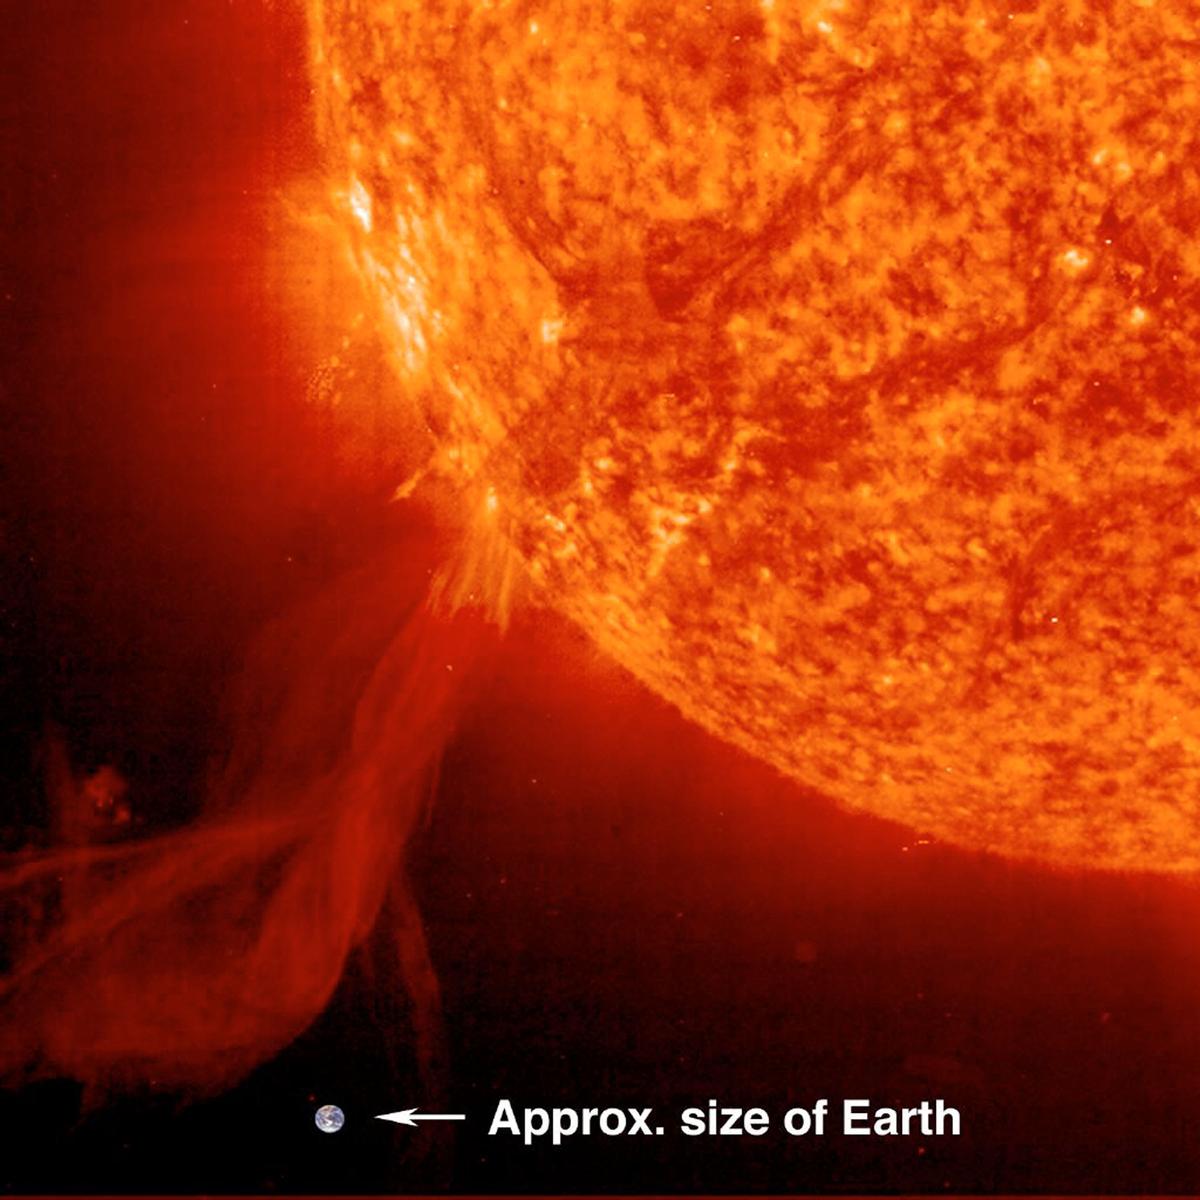 Astronomers at the Solar & Heliospheric Observatory (SOHO) captured this image of a solar prominence erupting from the surface of the sun on Oct. 25, 2002. It is shown here with the Earth in scale to demonstrate the immense size of this solar phenomenon. (SOHO/ESA/NASA/Getty Images)